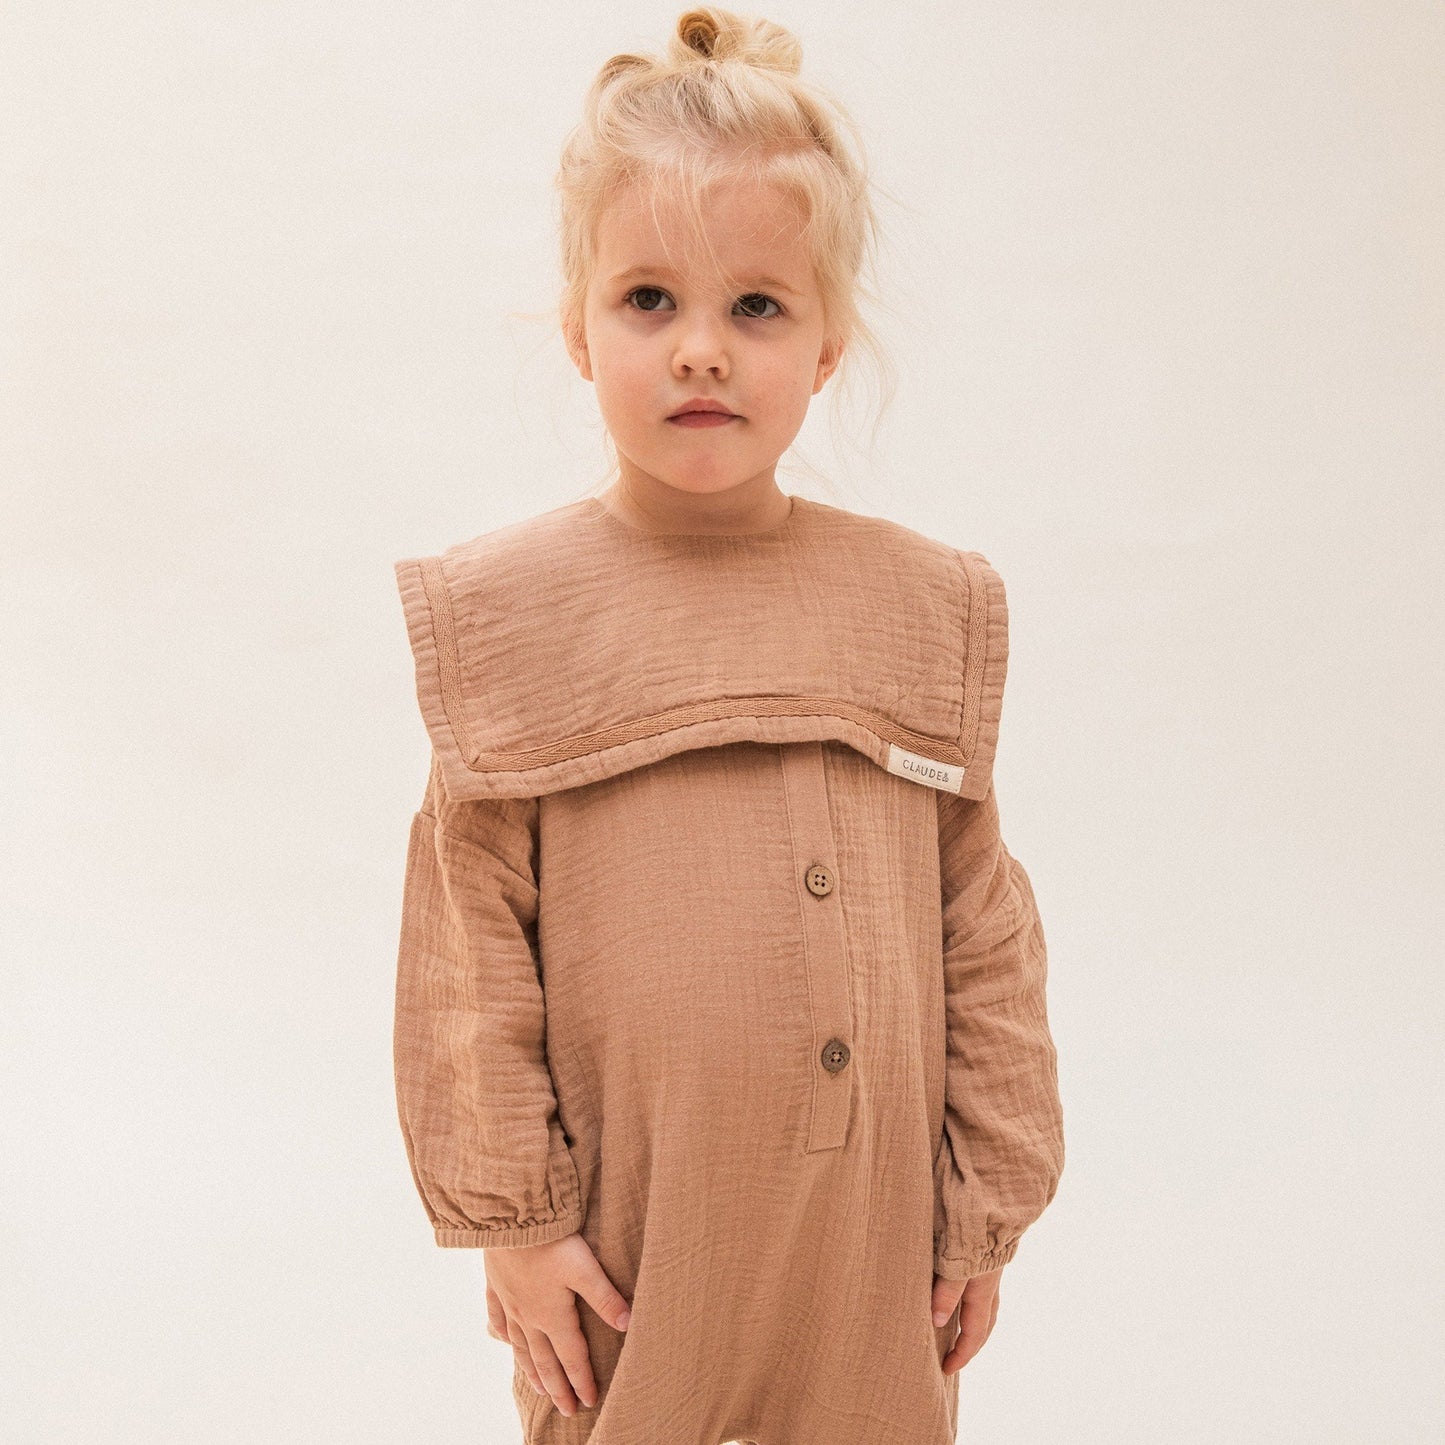 Claude & Co jumpsuit with collar in fawn, Children’s Clothing, baby clothing, children’s jumpsuit, sustainable children and baby clothes, Nottinghamshire stockist, modern kids shop, children’s summer clothing 